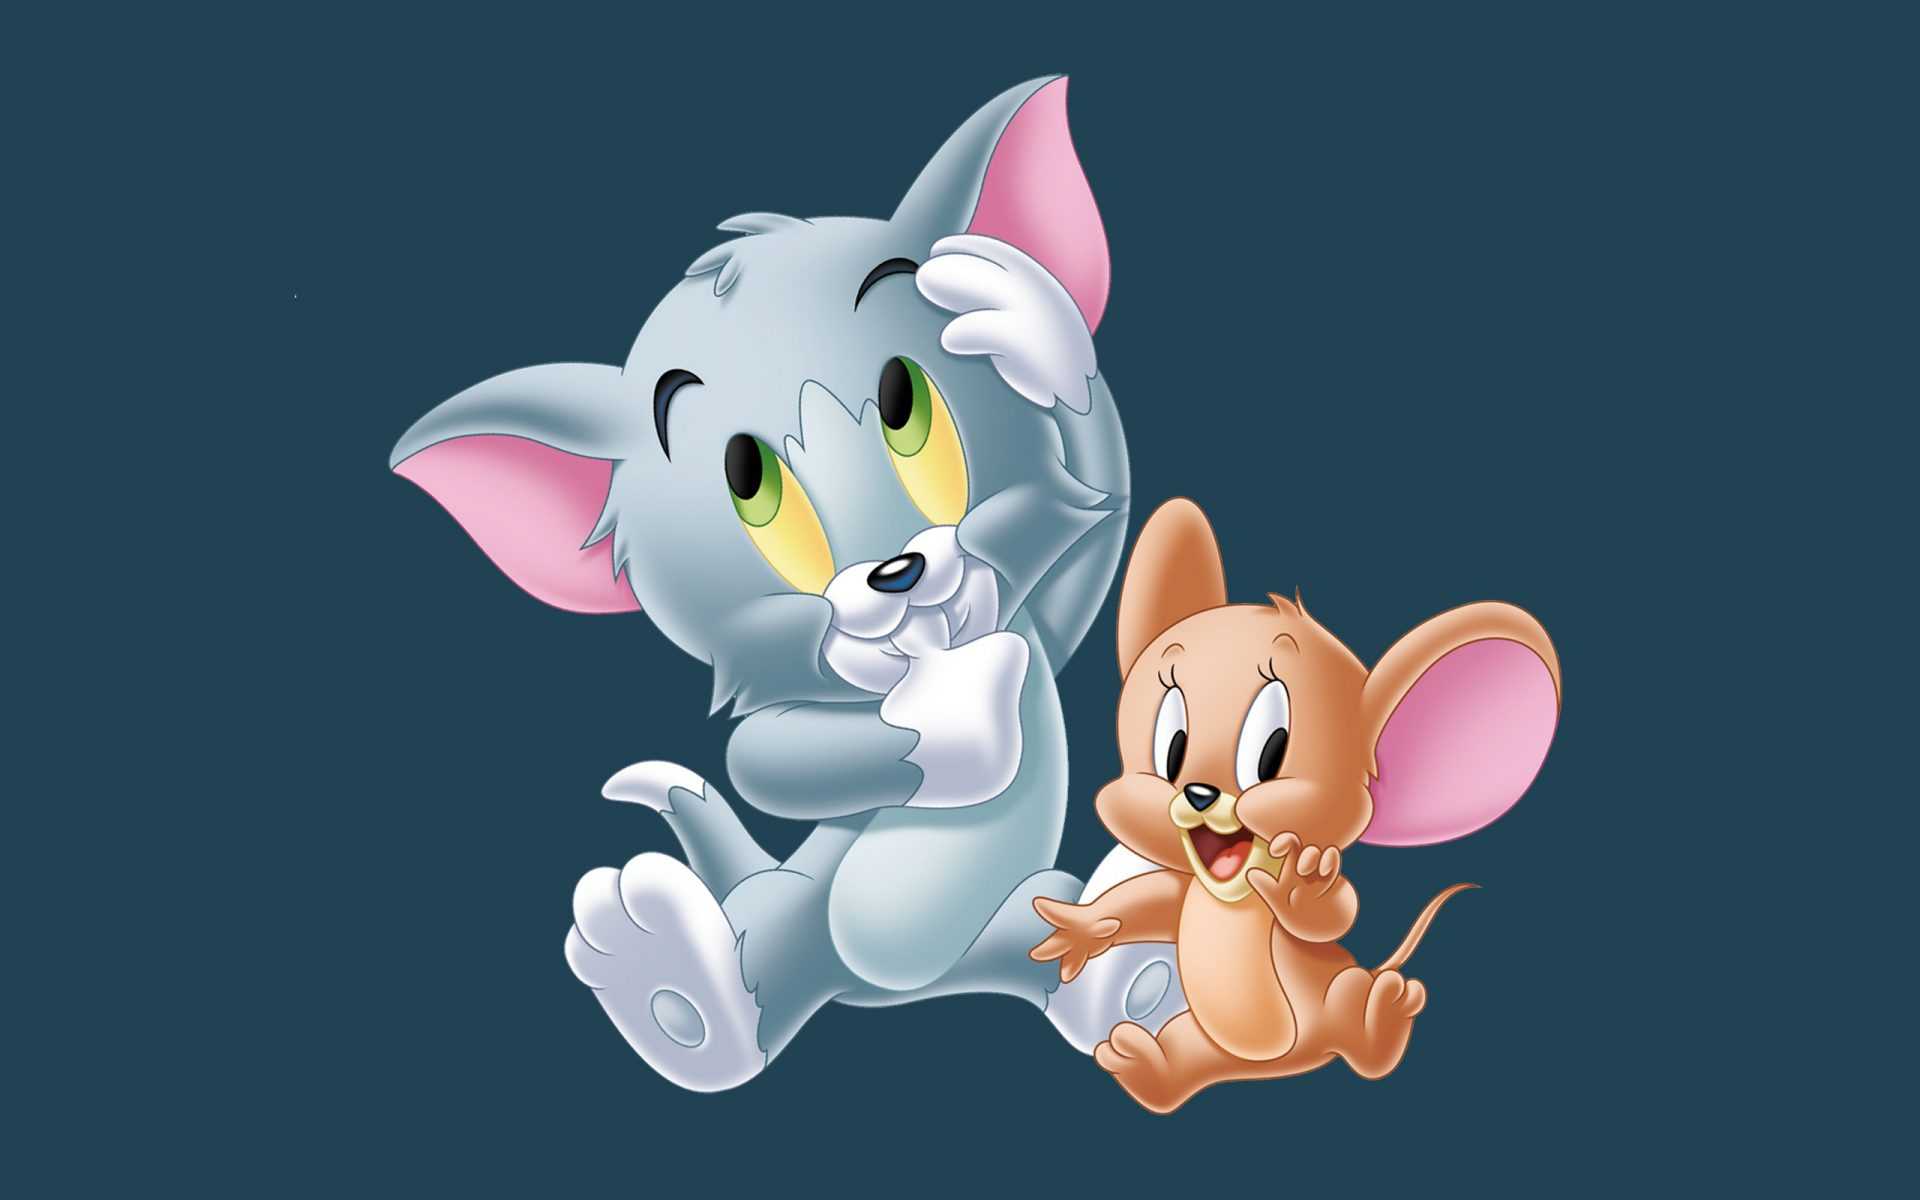 Tom and Jerry Wallpaper Free HD Wallpaper